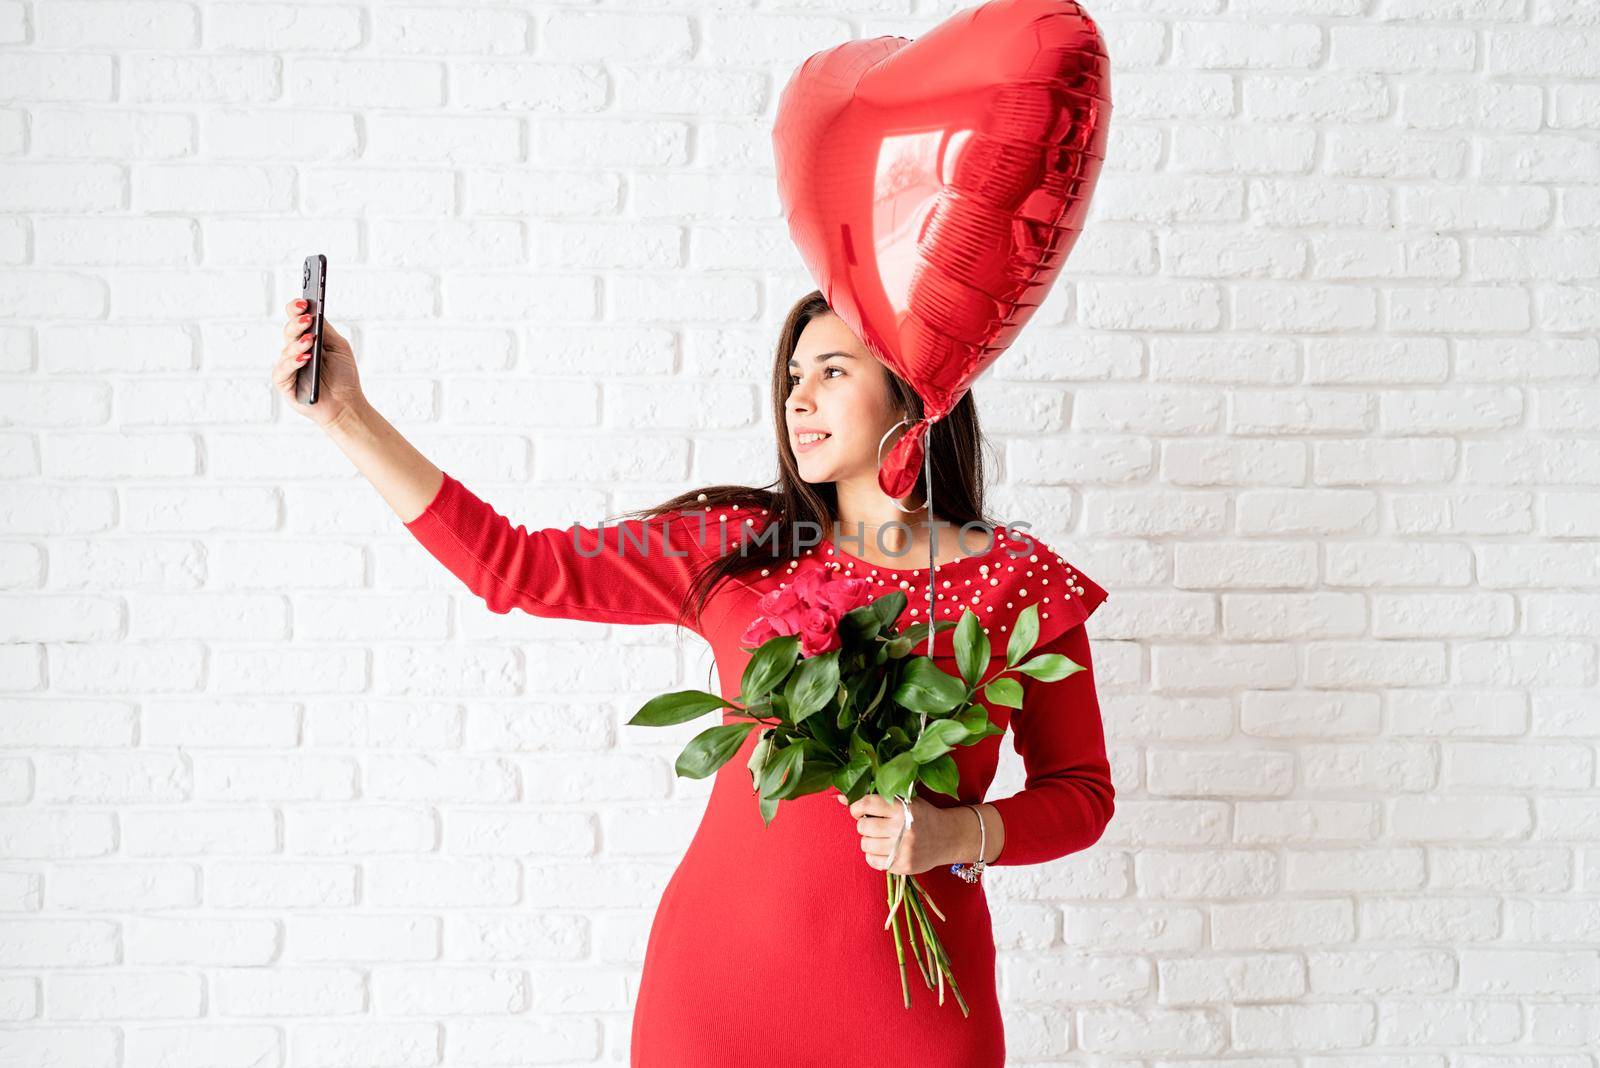 Valentines Day. Young brunette woman in red dress holding a red heart balloon and flowers over white brick wall background